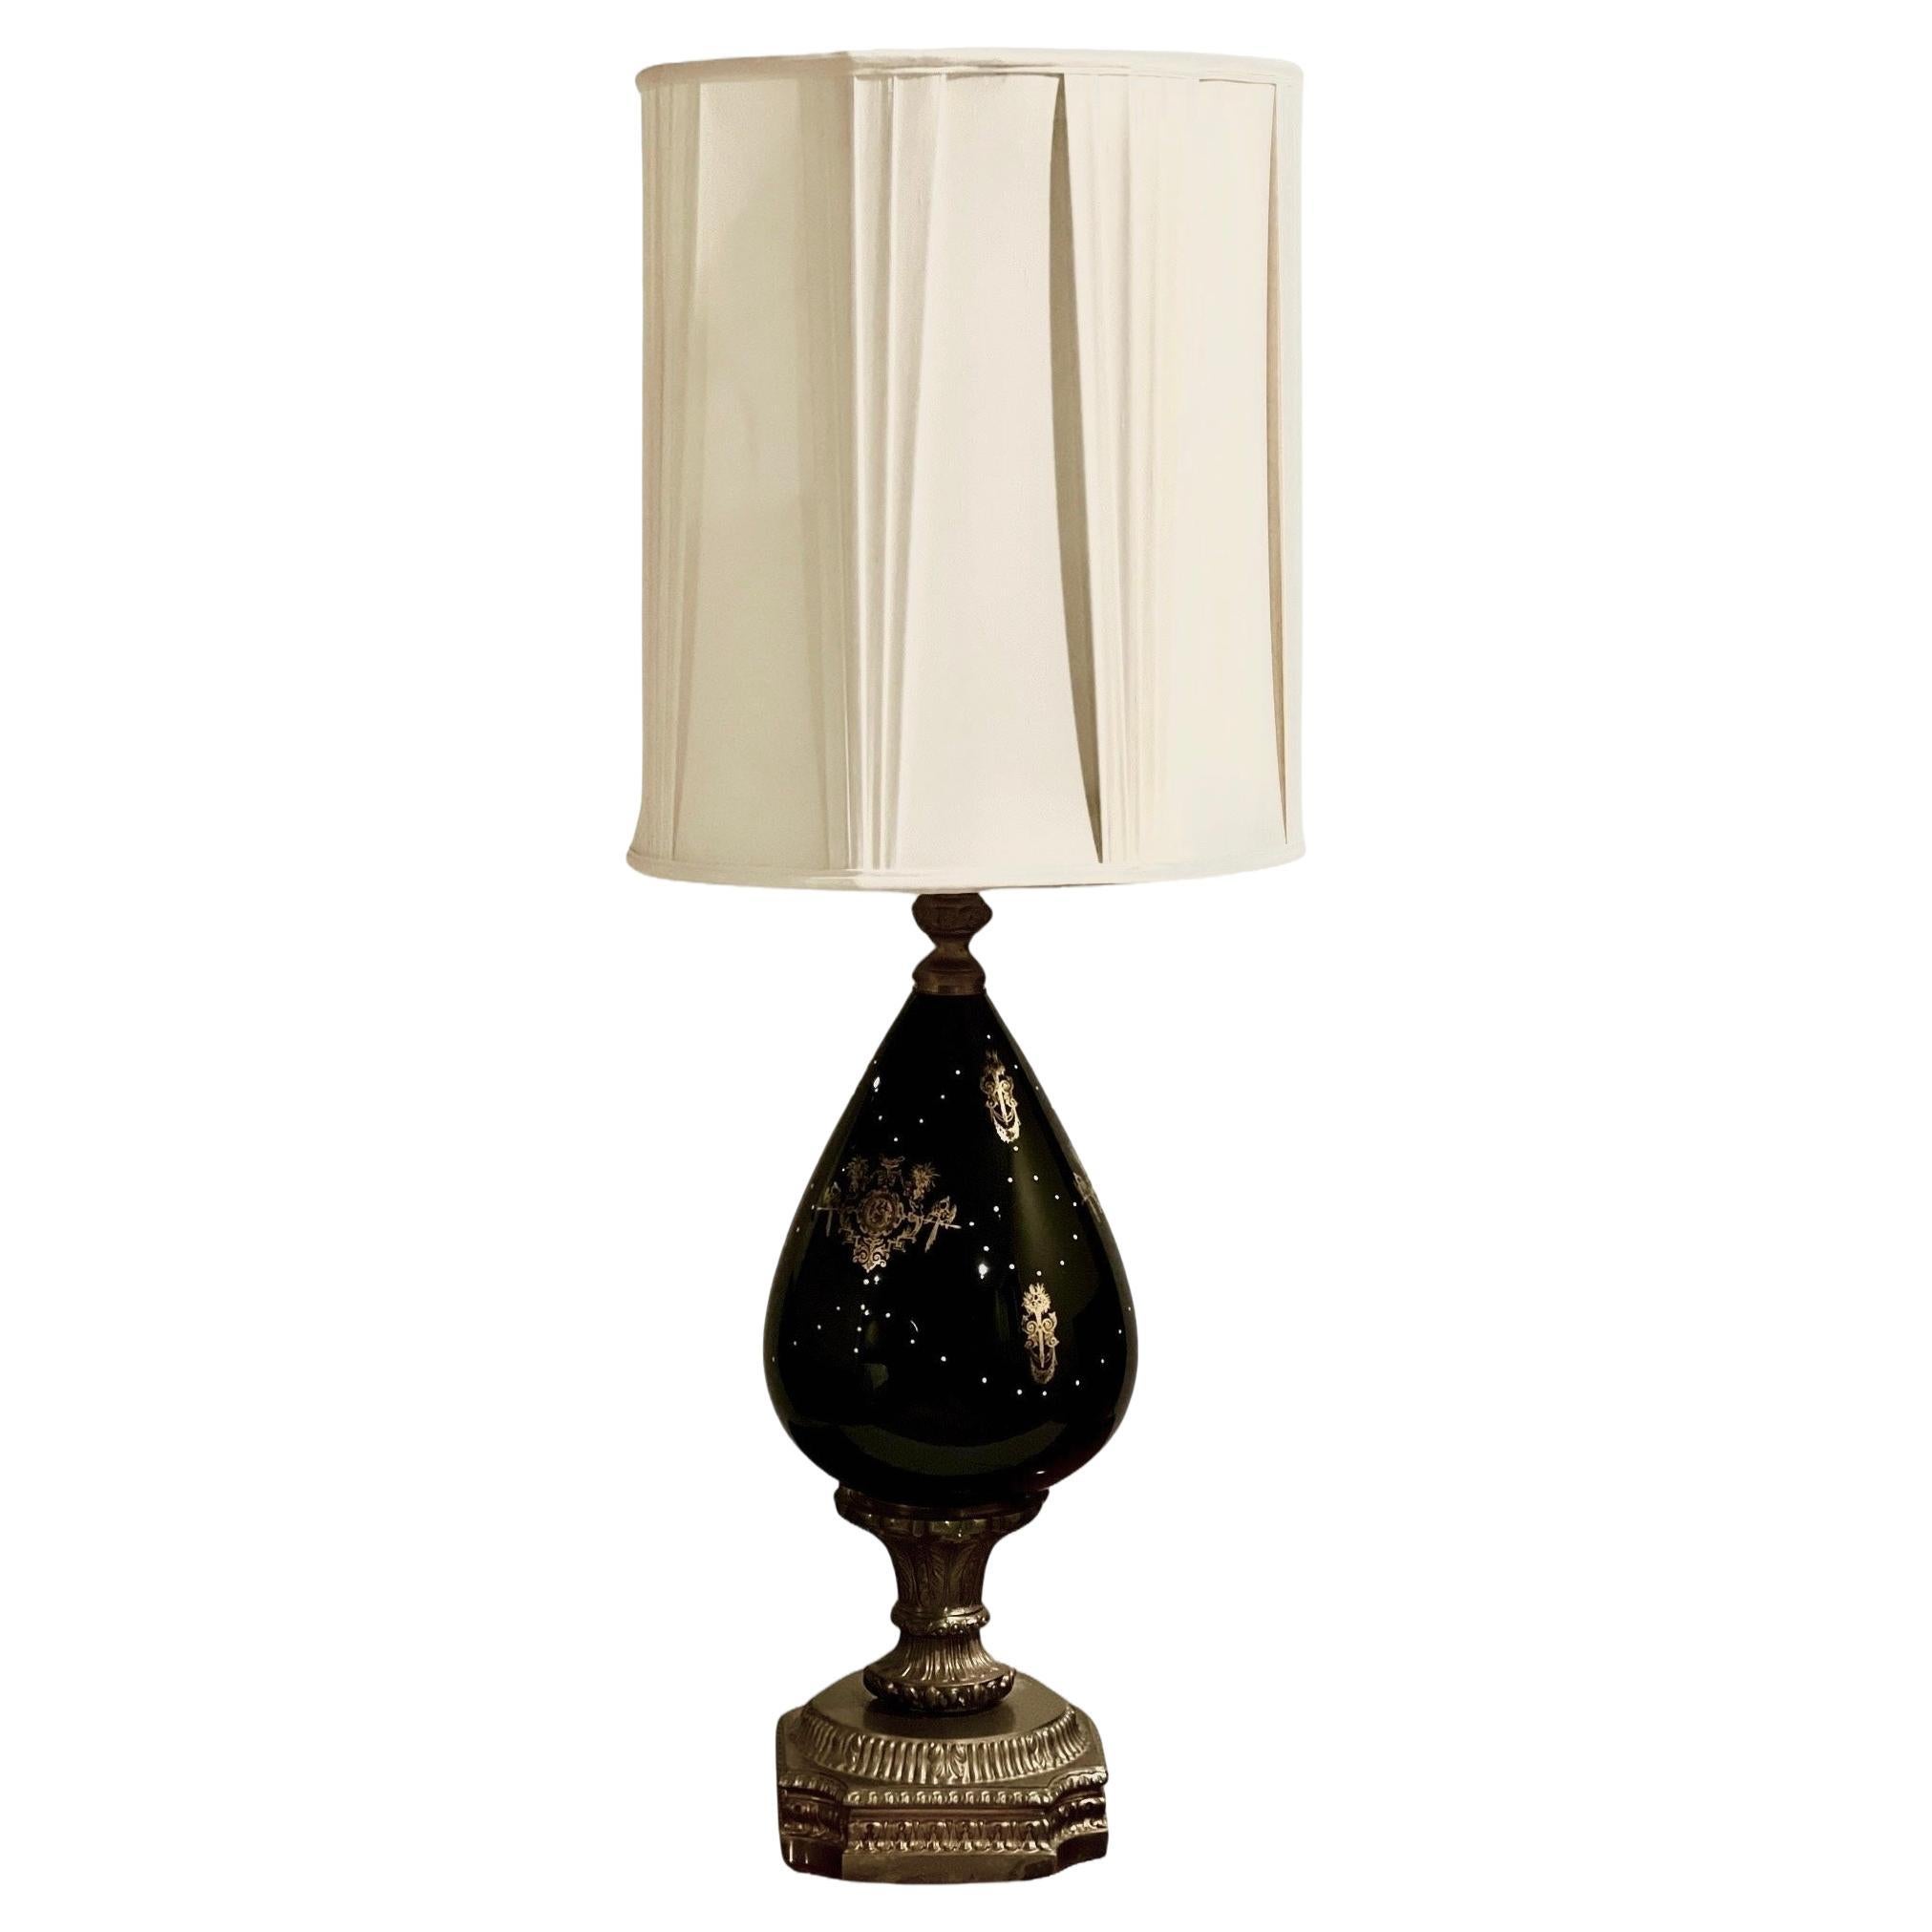 Antique French Brass and Porcelain Table Lamp with Ormolu, circa 1890